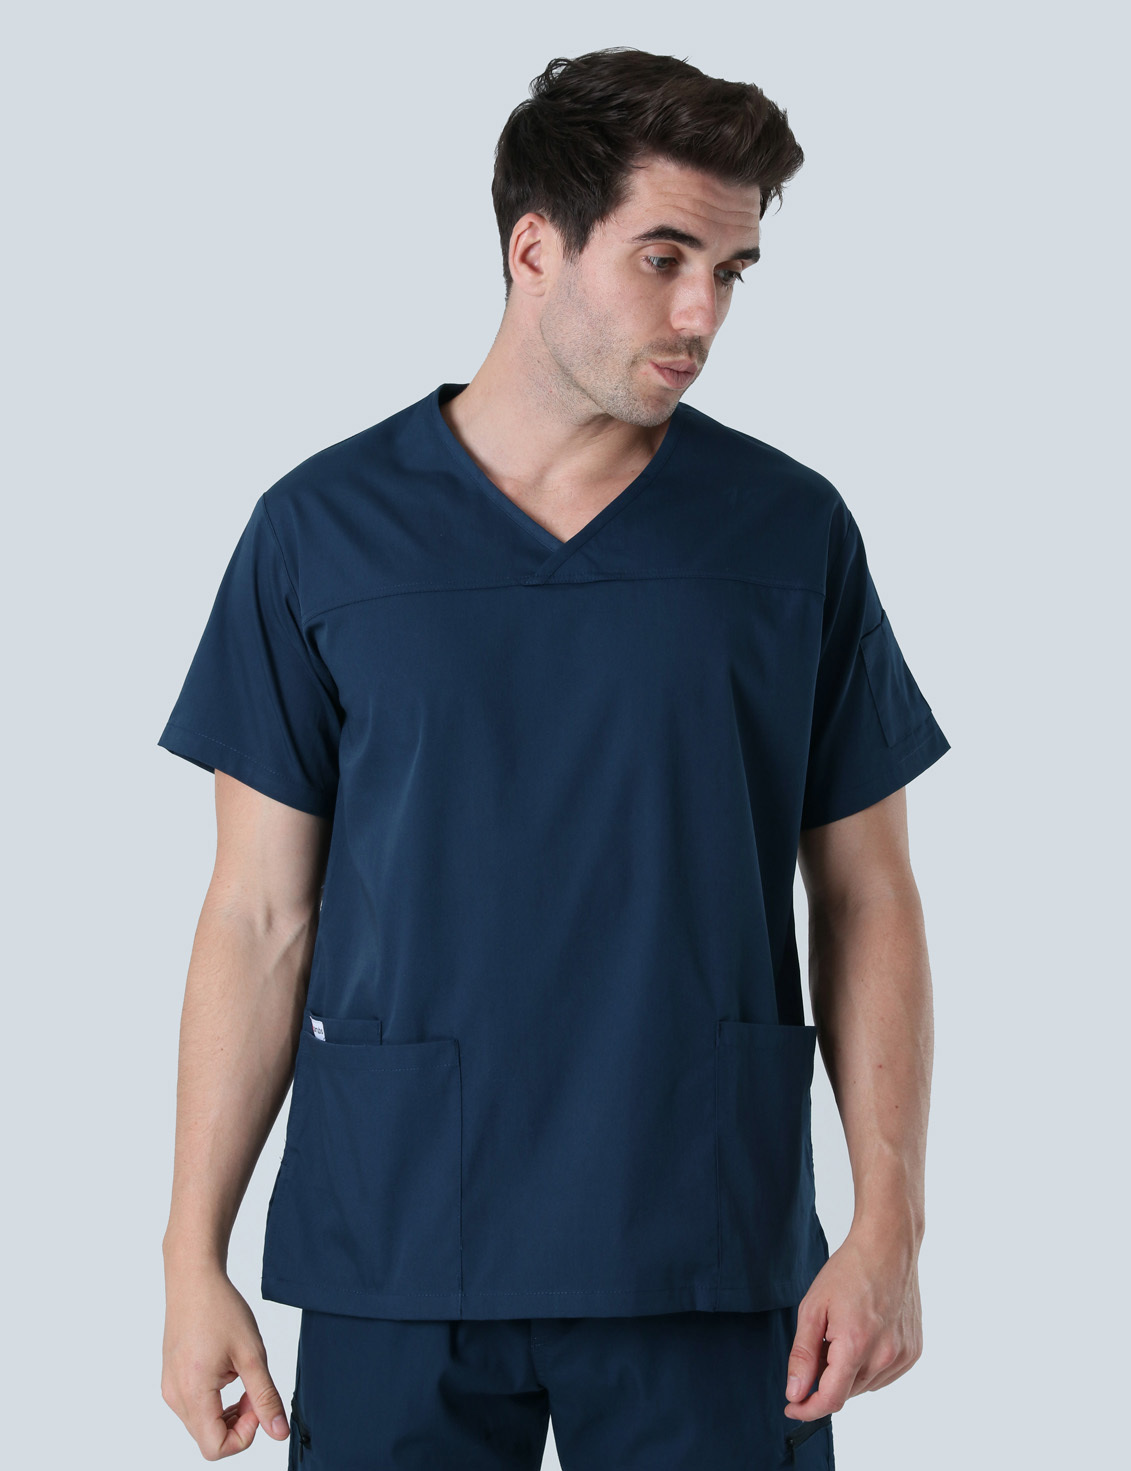 Gatton Health (Men's Fit Solid Top and Cargo Pants in Navy incl Logos)